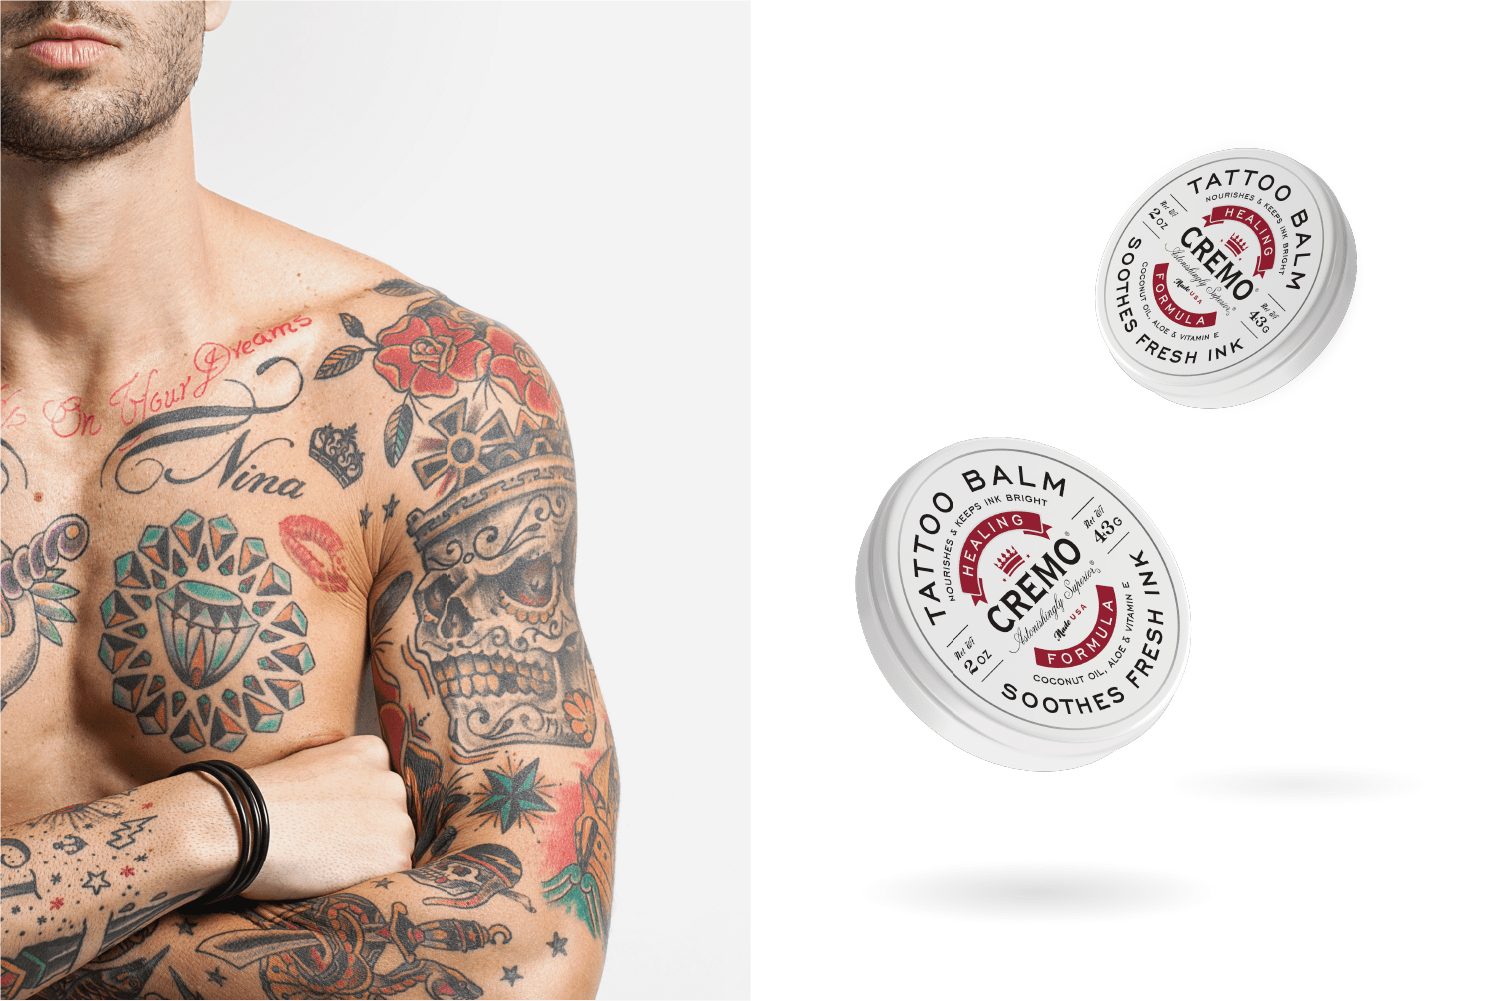 Cremo Tattoo Balm packaging